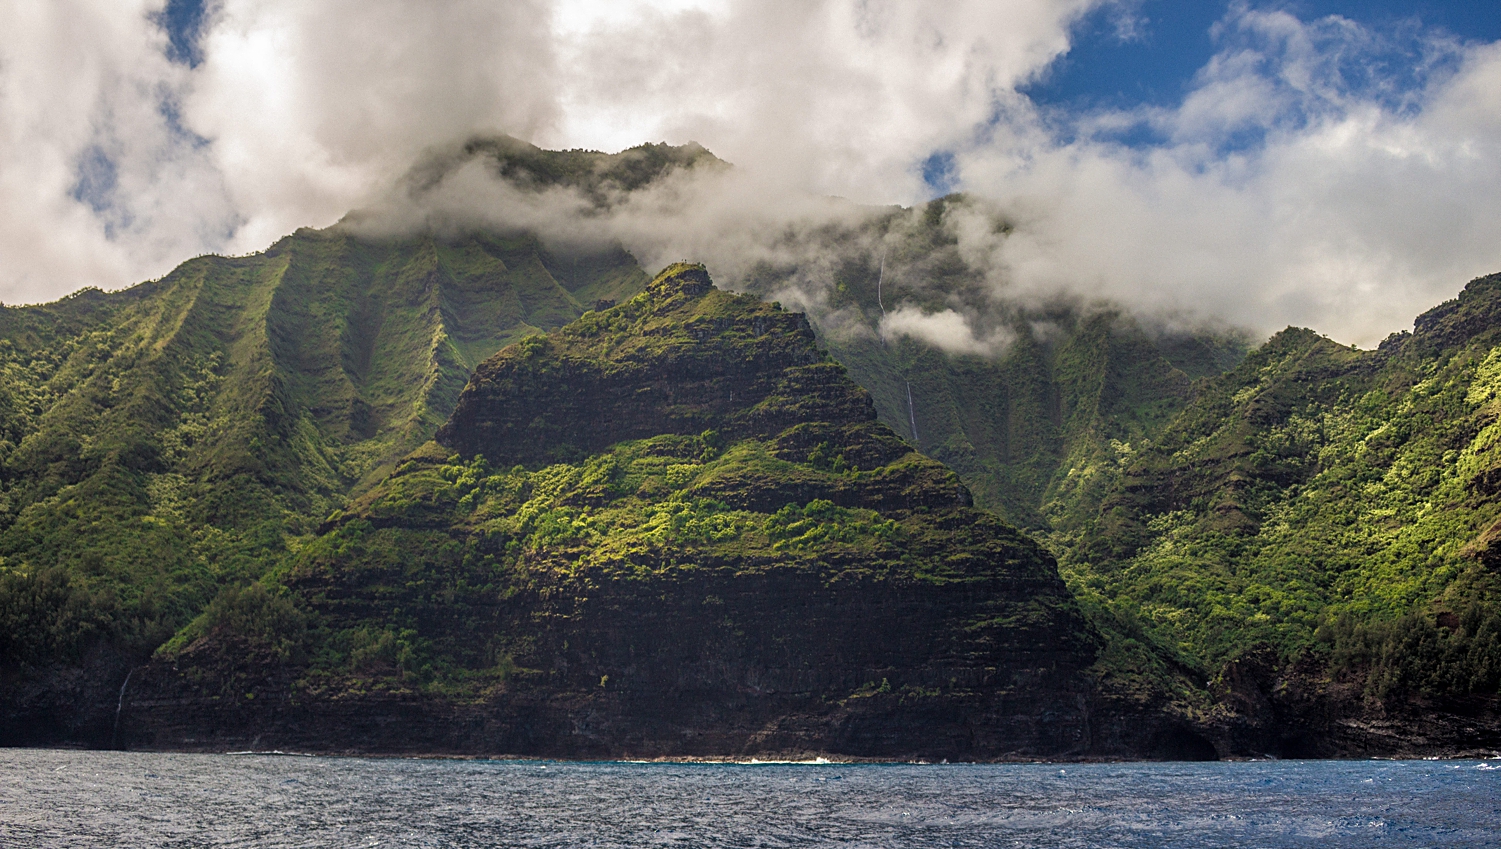 Green sea cliffs rising from ocean into clouds in hawaii